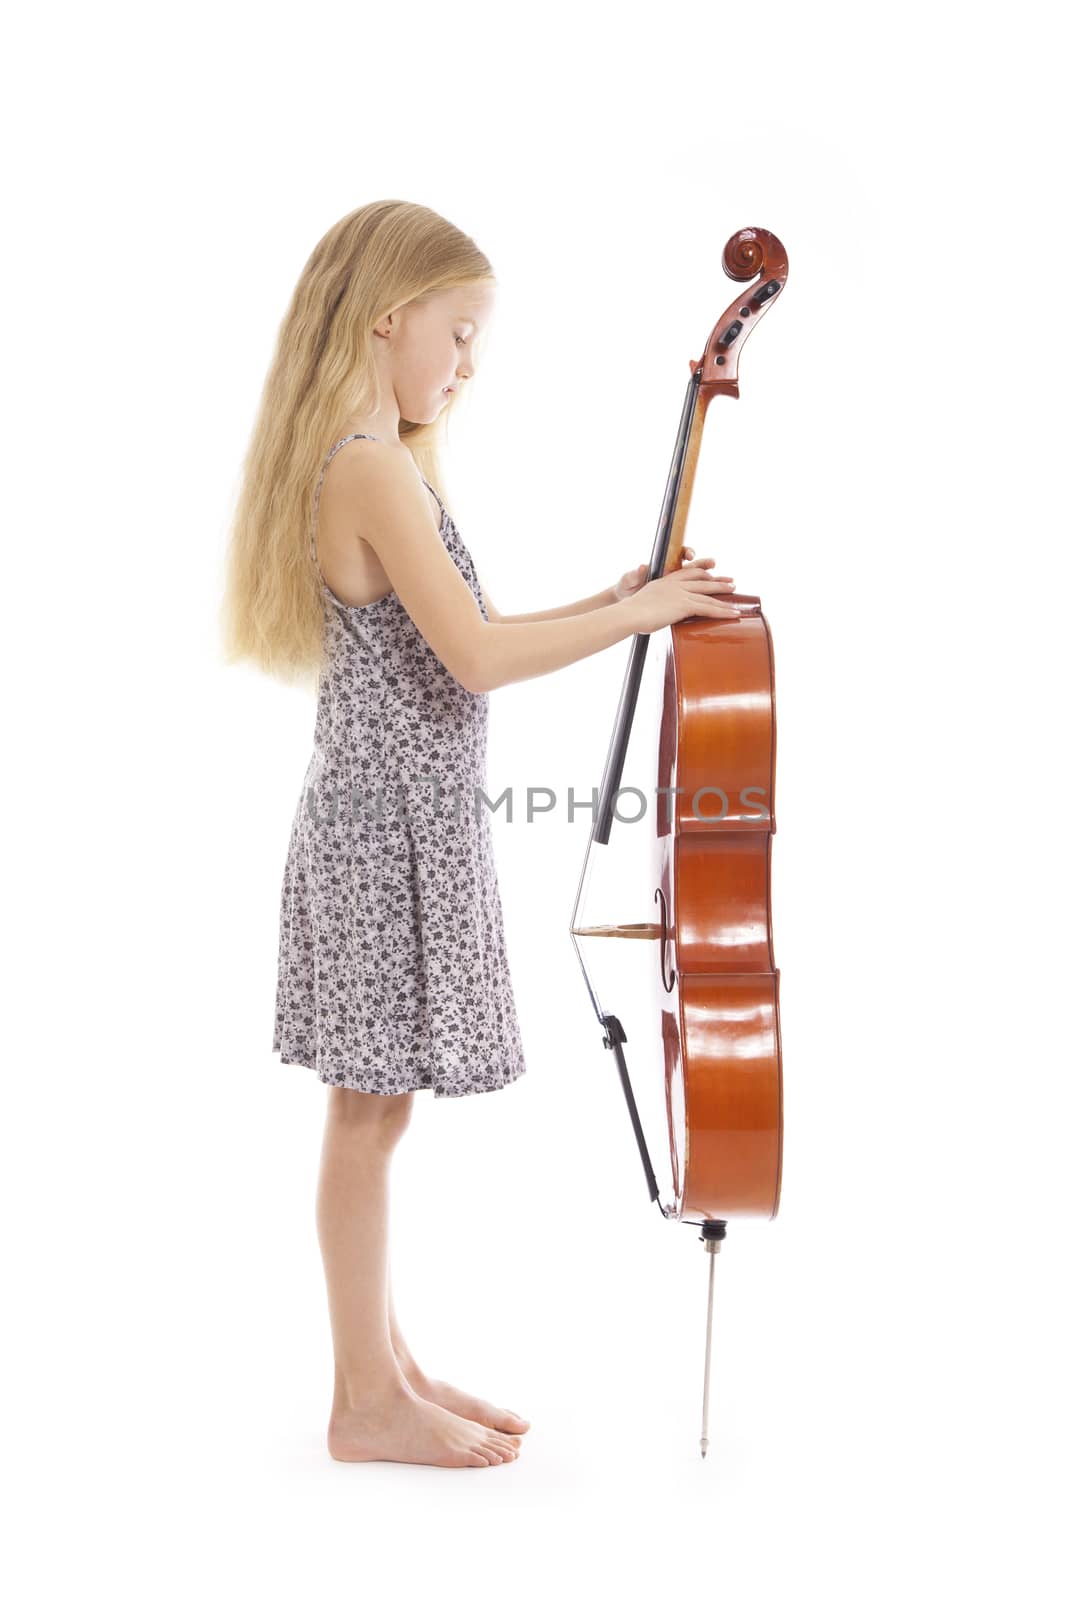 young girl in dress and her cello standing in studio against white background